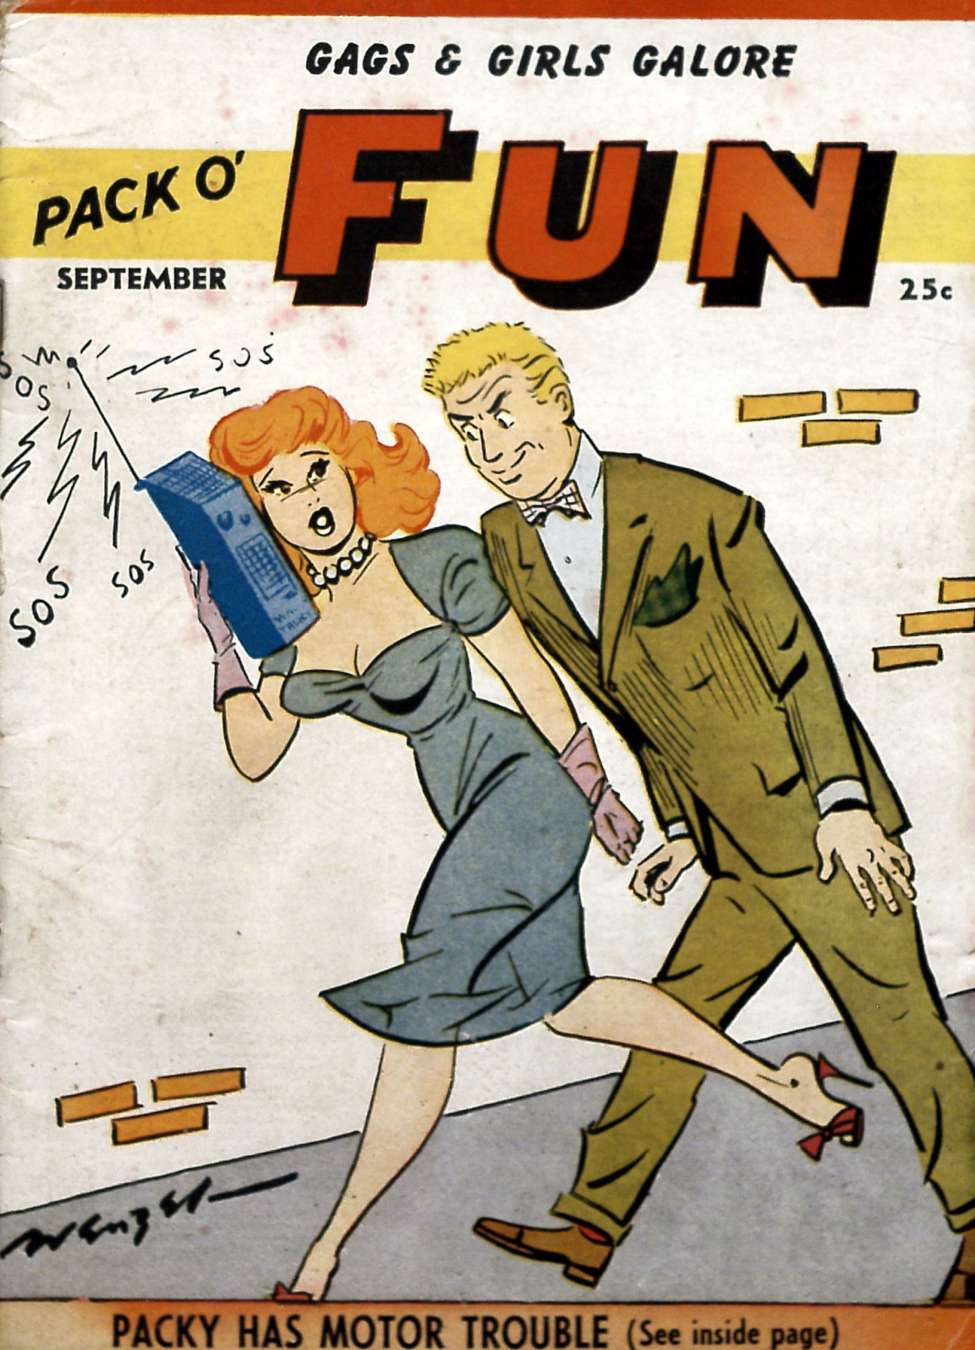 Comic Book Cover For Pack O Fun v7 1